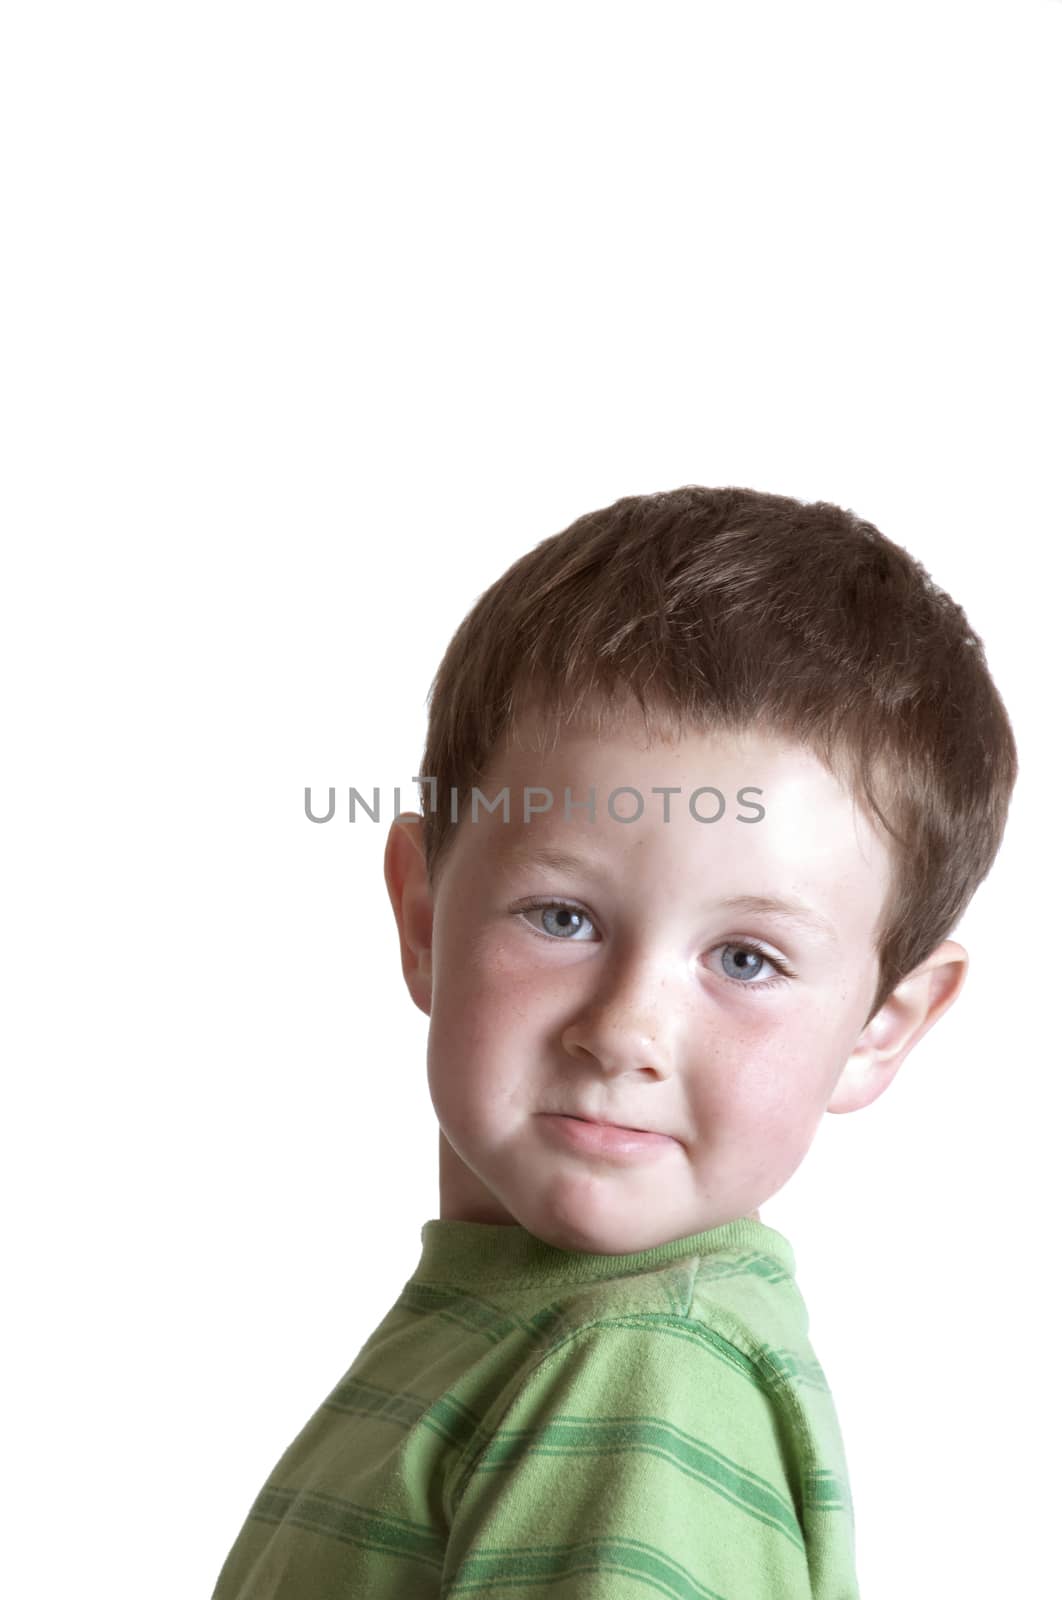 Little boy with a challenging look by rcarner